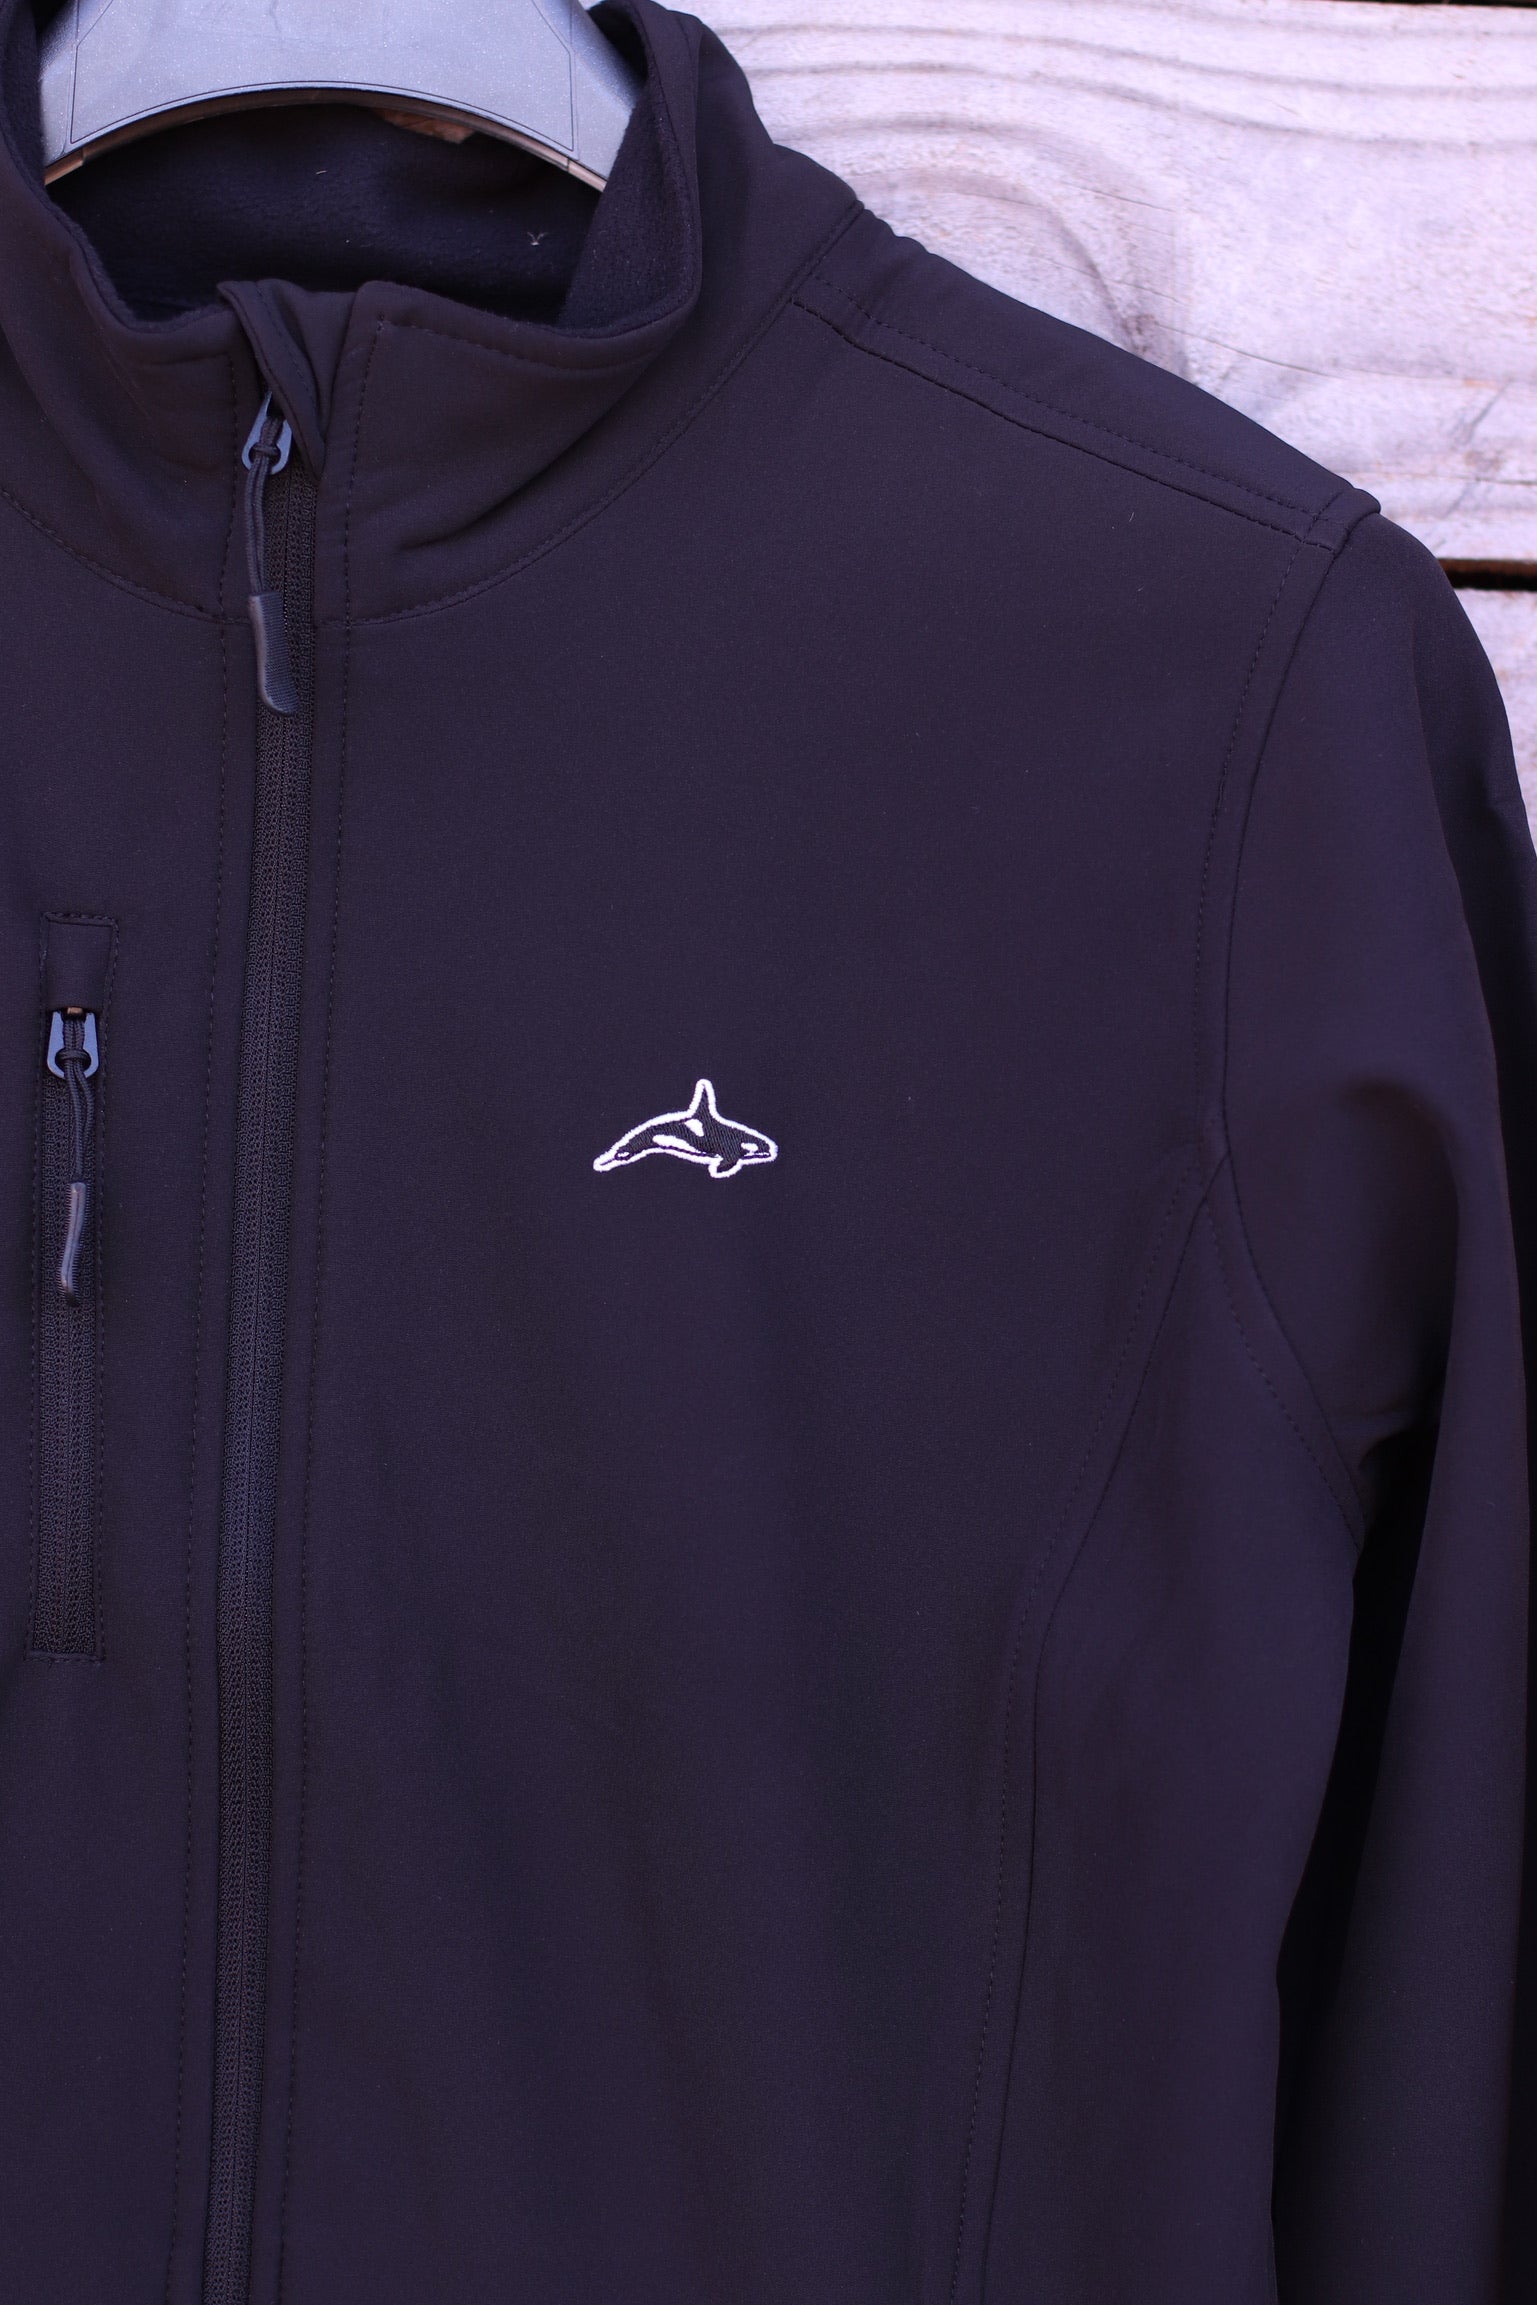 How windproof is softshell?